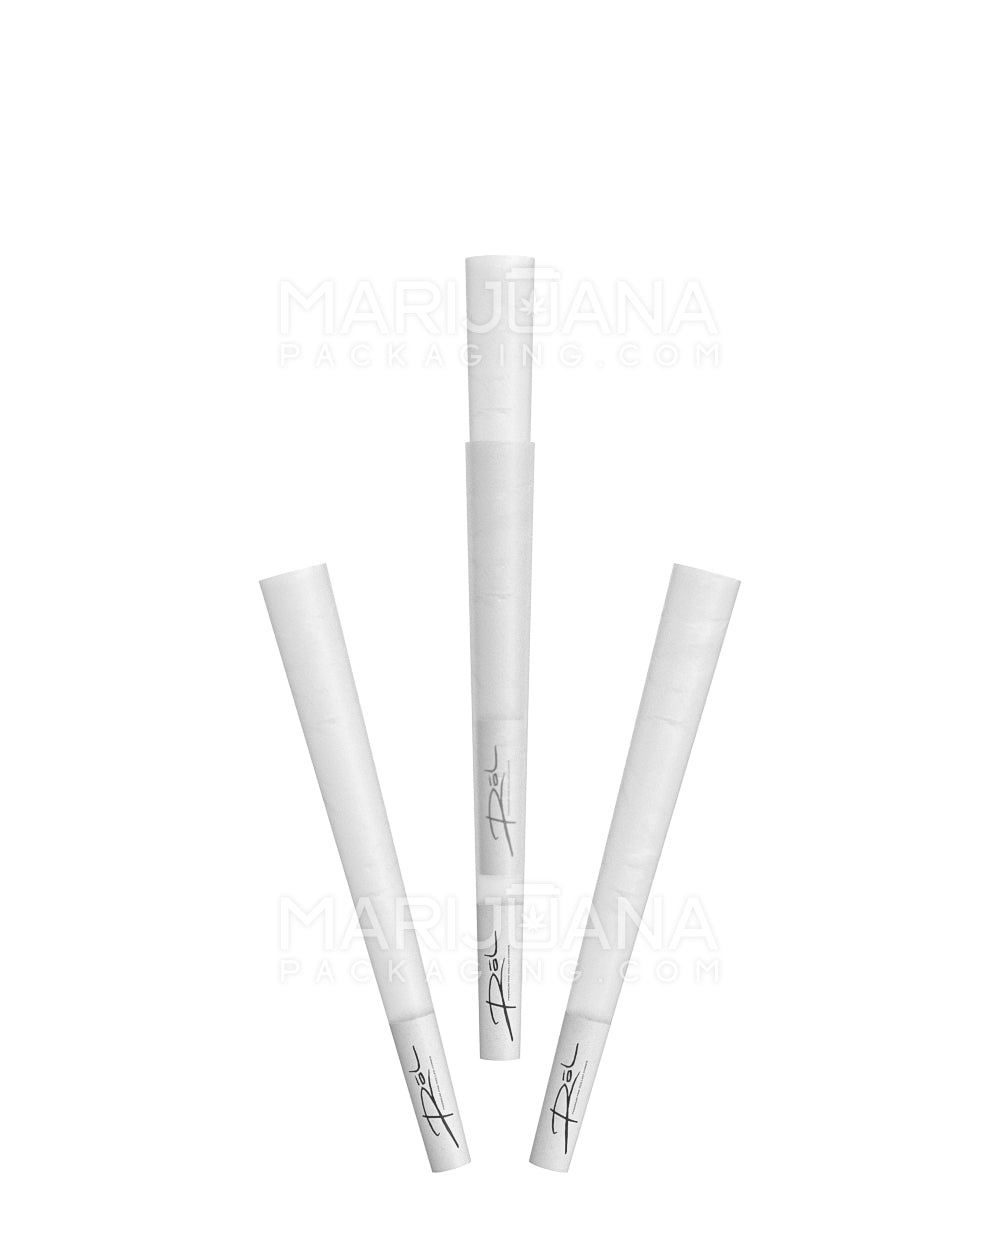 RōL | 1 1/4th Size Pre-Rolled Cones | 84mm - Porcelain White Paper - 900 Count